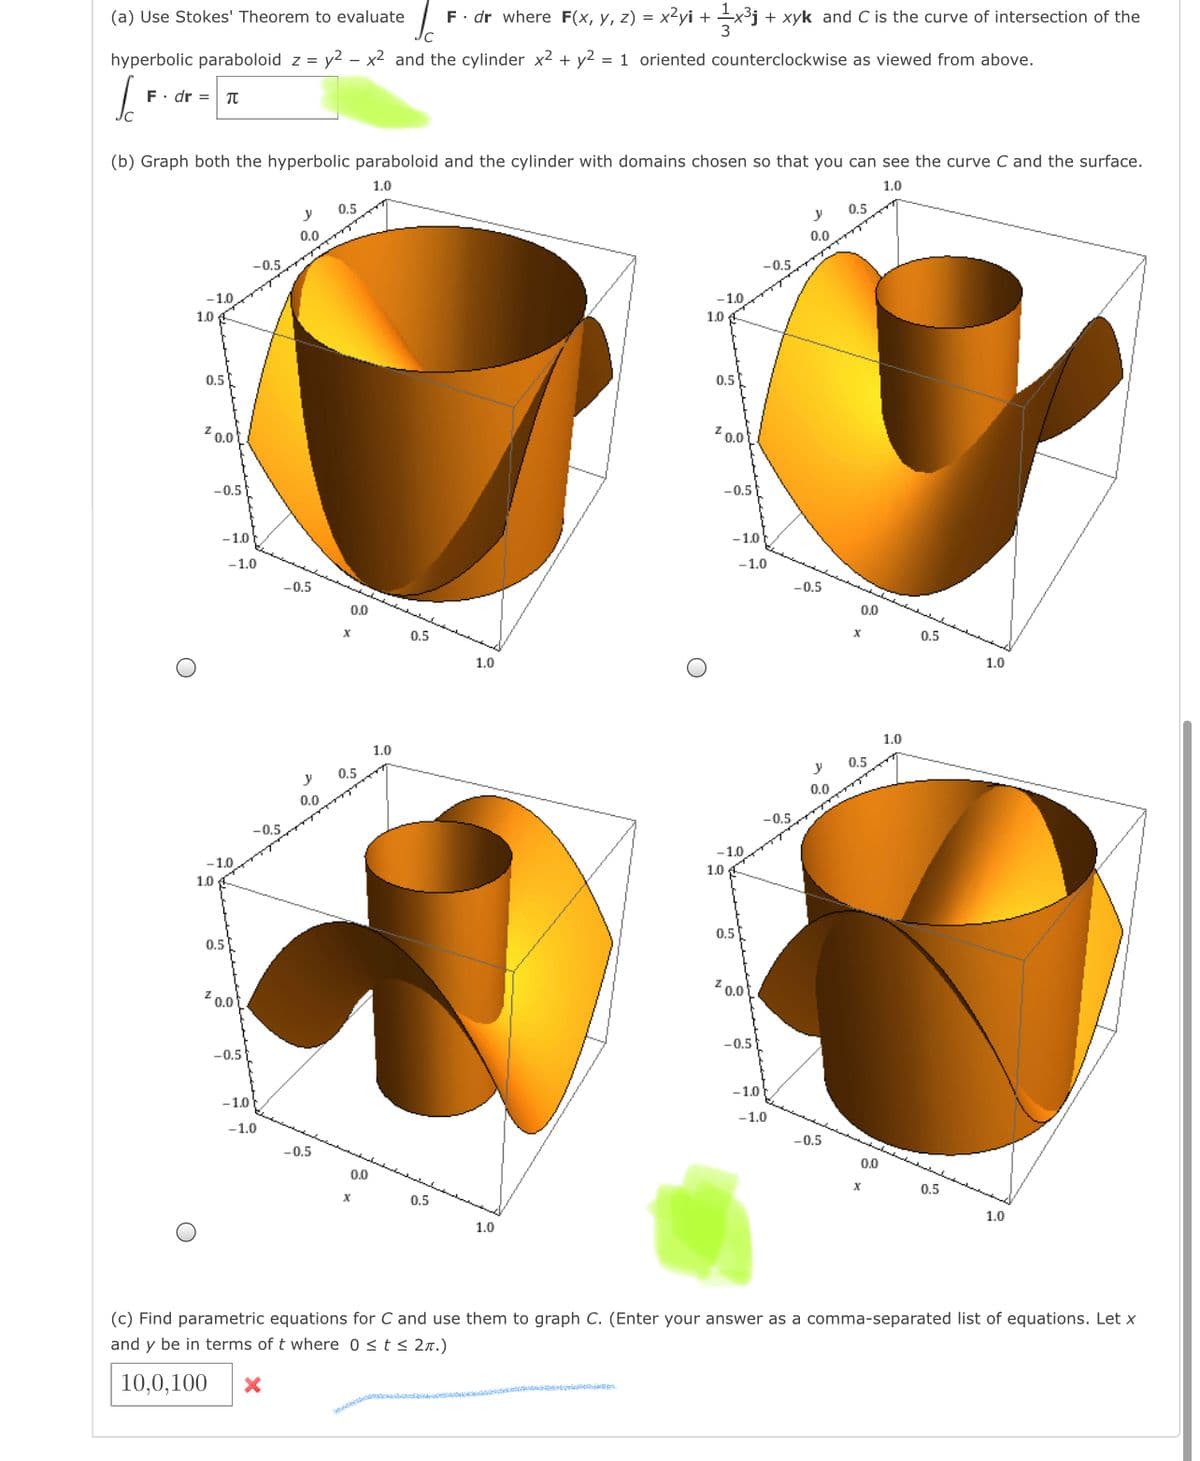 (a) Use Stokes' Theorem to evaluate
F. dr where F(x, y, z) = x²yi + +x3j + xyk and C is the curve of intersection of the
hyperbolic paraboloid z = y2 – x2 and the cylinder x2 + y² = 1 oriented counterclockwise as viewed from above.
F. dr = T
(b) Graph both the hyperbolic paraboloid and the cylinder with domains chosen so that you can see the curve C and the surface.
1.0
1.0
0.5
0,5
y
y
0.0
0.0
-0.5
-0.5
-1.0
-1.0
1.0
1.0 A
0.5
0.5
Z 0.0t
Z 0.0
-0.5
-0.5
-1.0
-1.0
-1.0
-1.0
-0,5
-0,5
0.0
00
0.5
0.5
1.0
1.0
1.0
1.0
0,5
0.5
0.0
0.0
-0.5
-0.5
-1.0
-1.0
1.0 A
1.0
0.5
0.5
20.0
Z 0.0
-0.5
-0.5
-1.0
-1.0
-1.0
-1.0
-0.5
-0,5
00
00
0.5
0.5
1.0
1.0
(c) Find parametric equations for C and use them to graph C. (Enter your answer as a comma-separated list of equations. Let x
and y be in terms of t where 0 <t< 2.)
10,0,100
